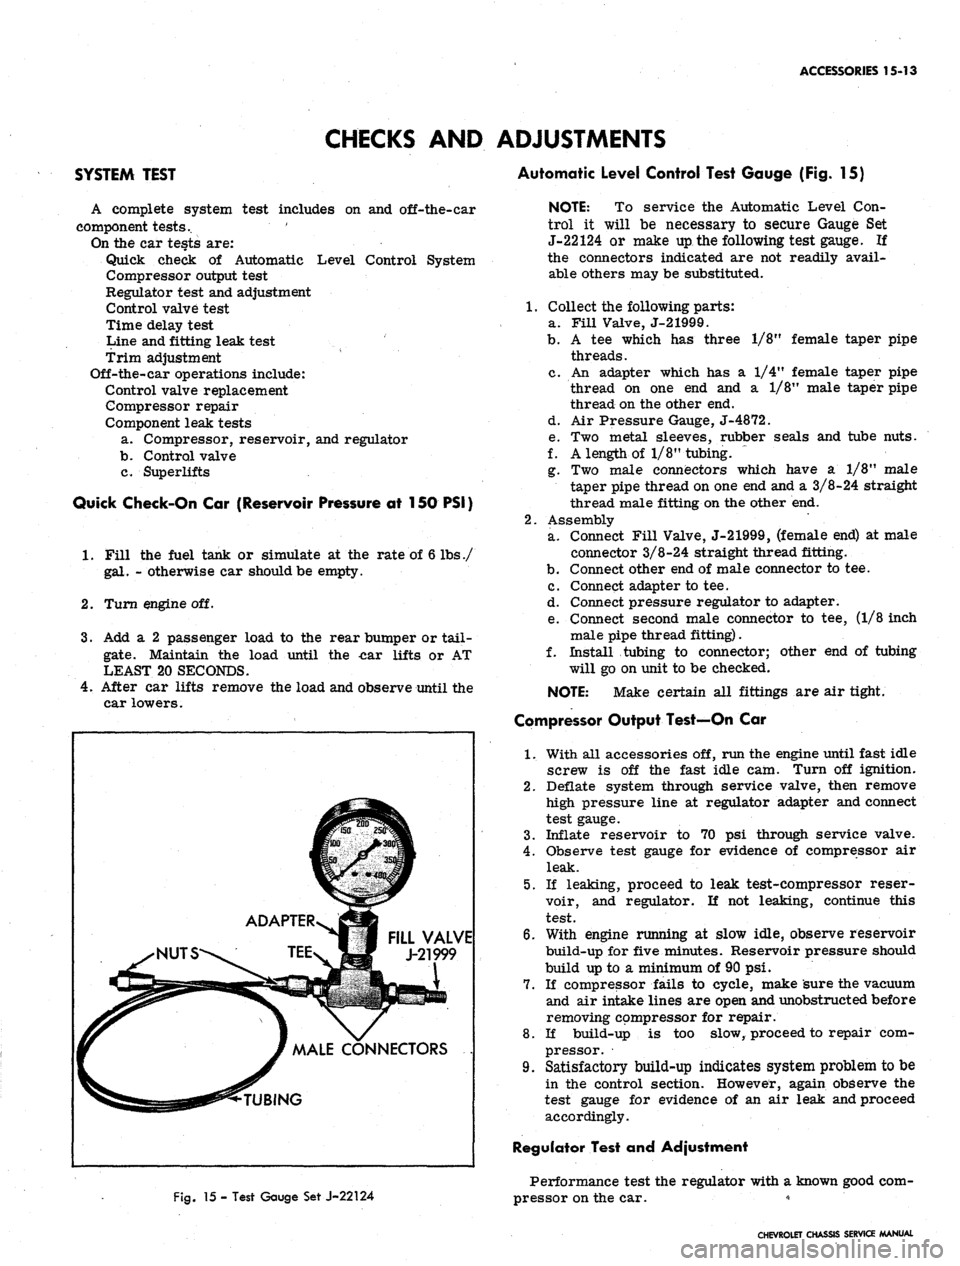 CHEVROLET CAMARO 1967 1.G Chassis Workshop Manual 
ACCESSORIES 15-13

SYSTEM TEST 
CHECKS AND ADJUSTMENTS

Automatic Level Control Test Gauge (Fig. 15)

A complete system test includes on and off-the-car

component tests.. 

On the car tests are:

Q